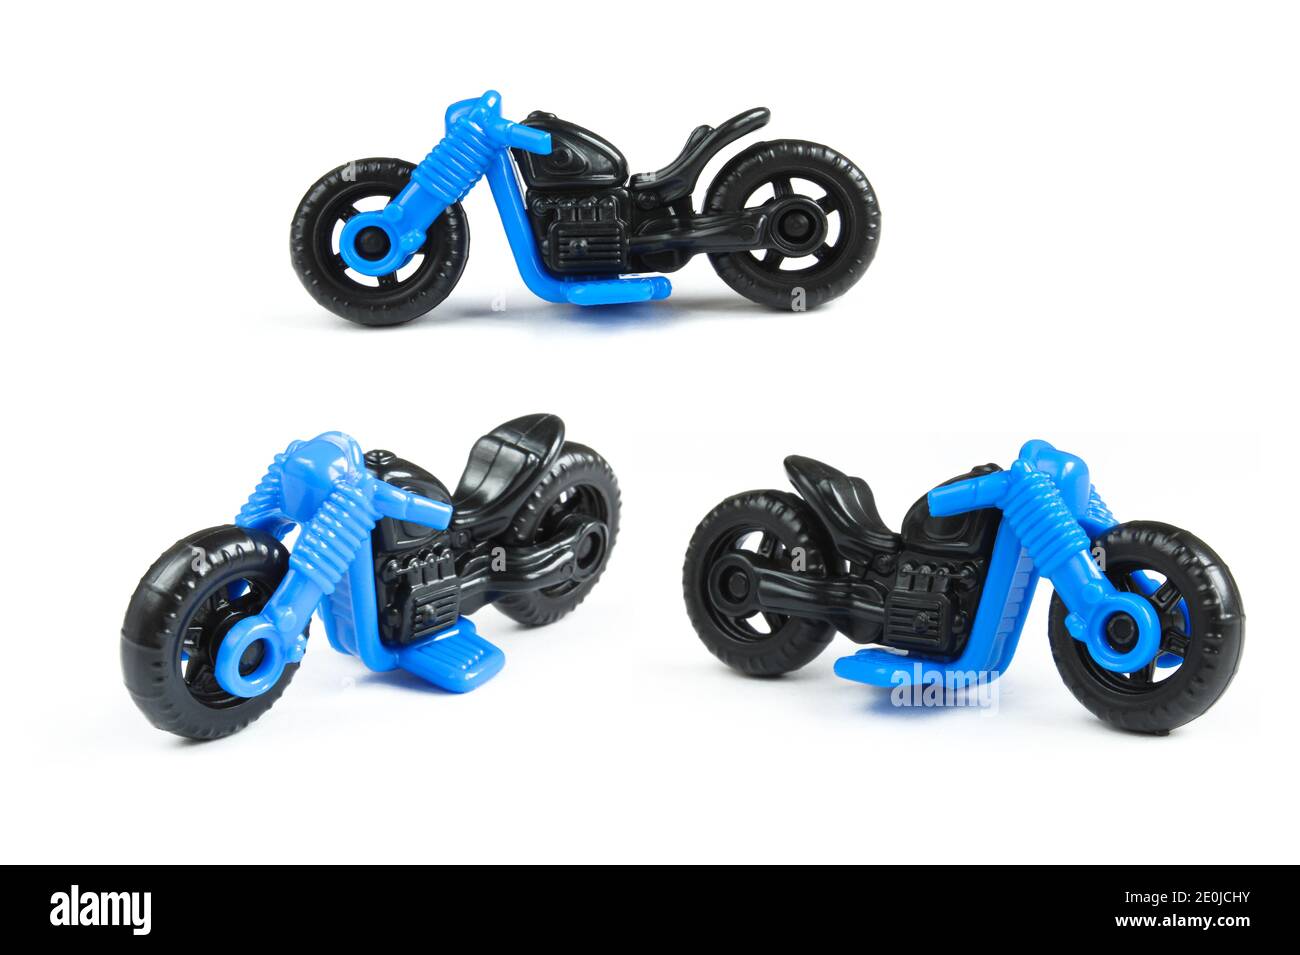 Black and blue motorbike toy isolated on white background. Plastic chopper motorcycle for kids play Stock Photo